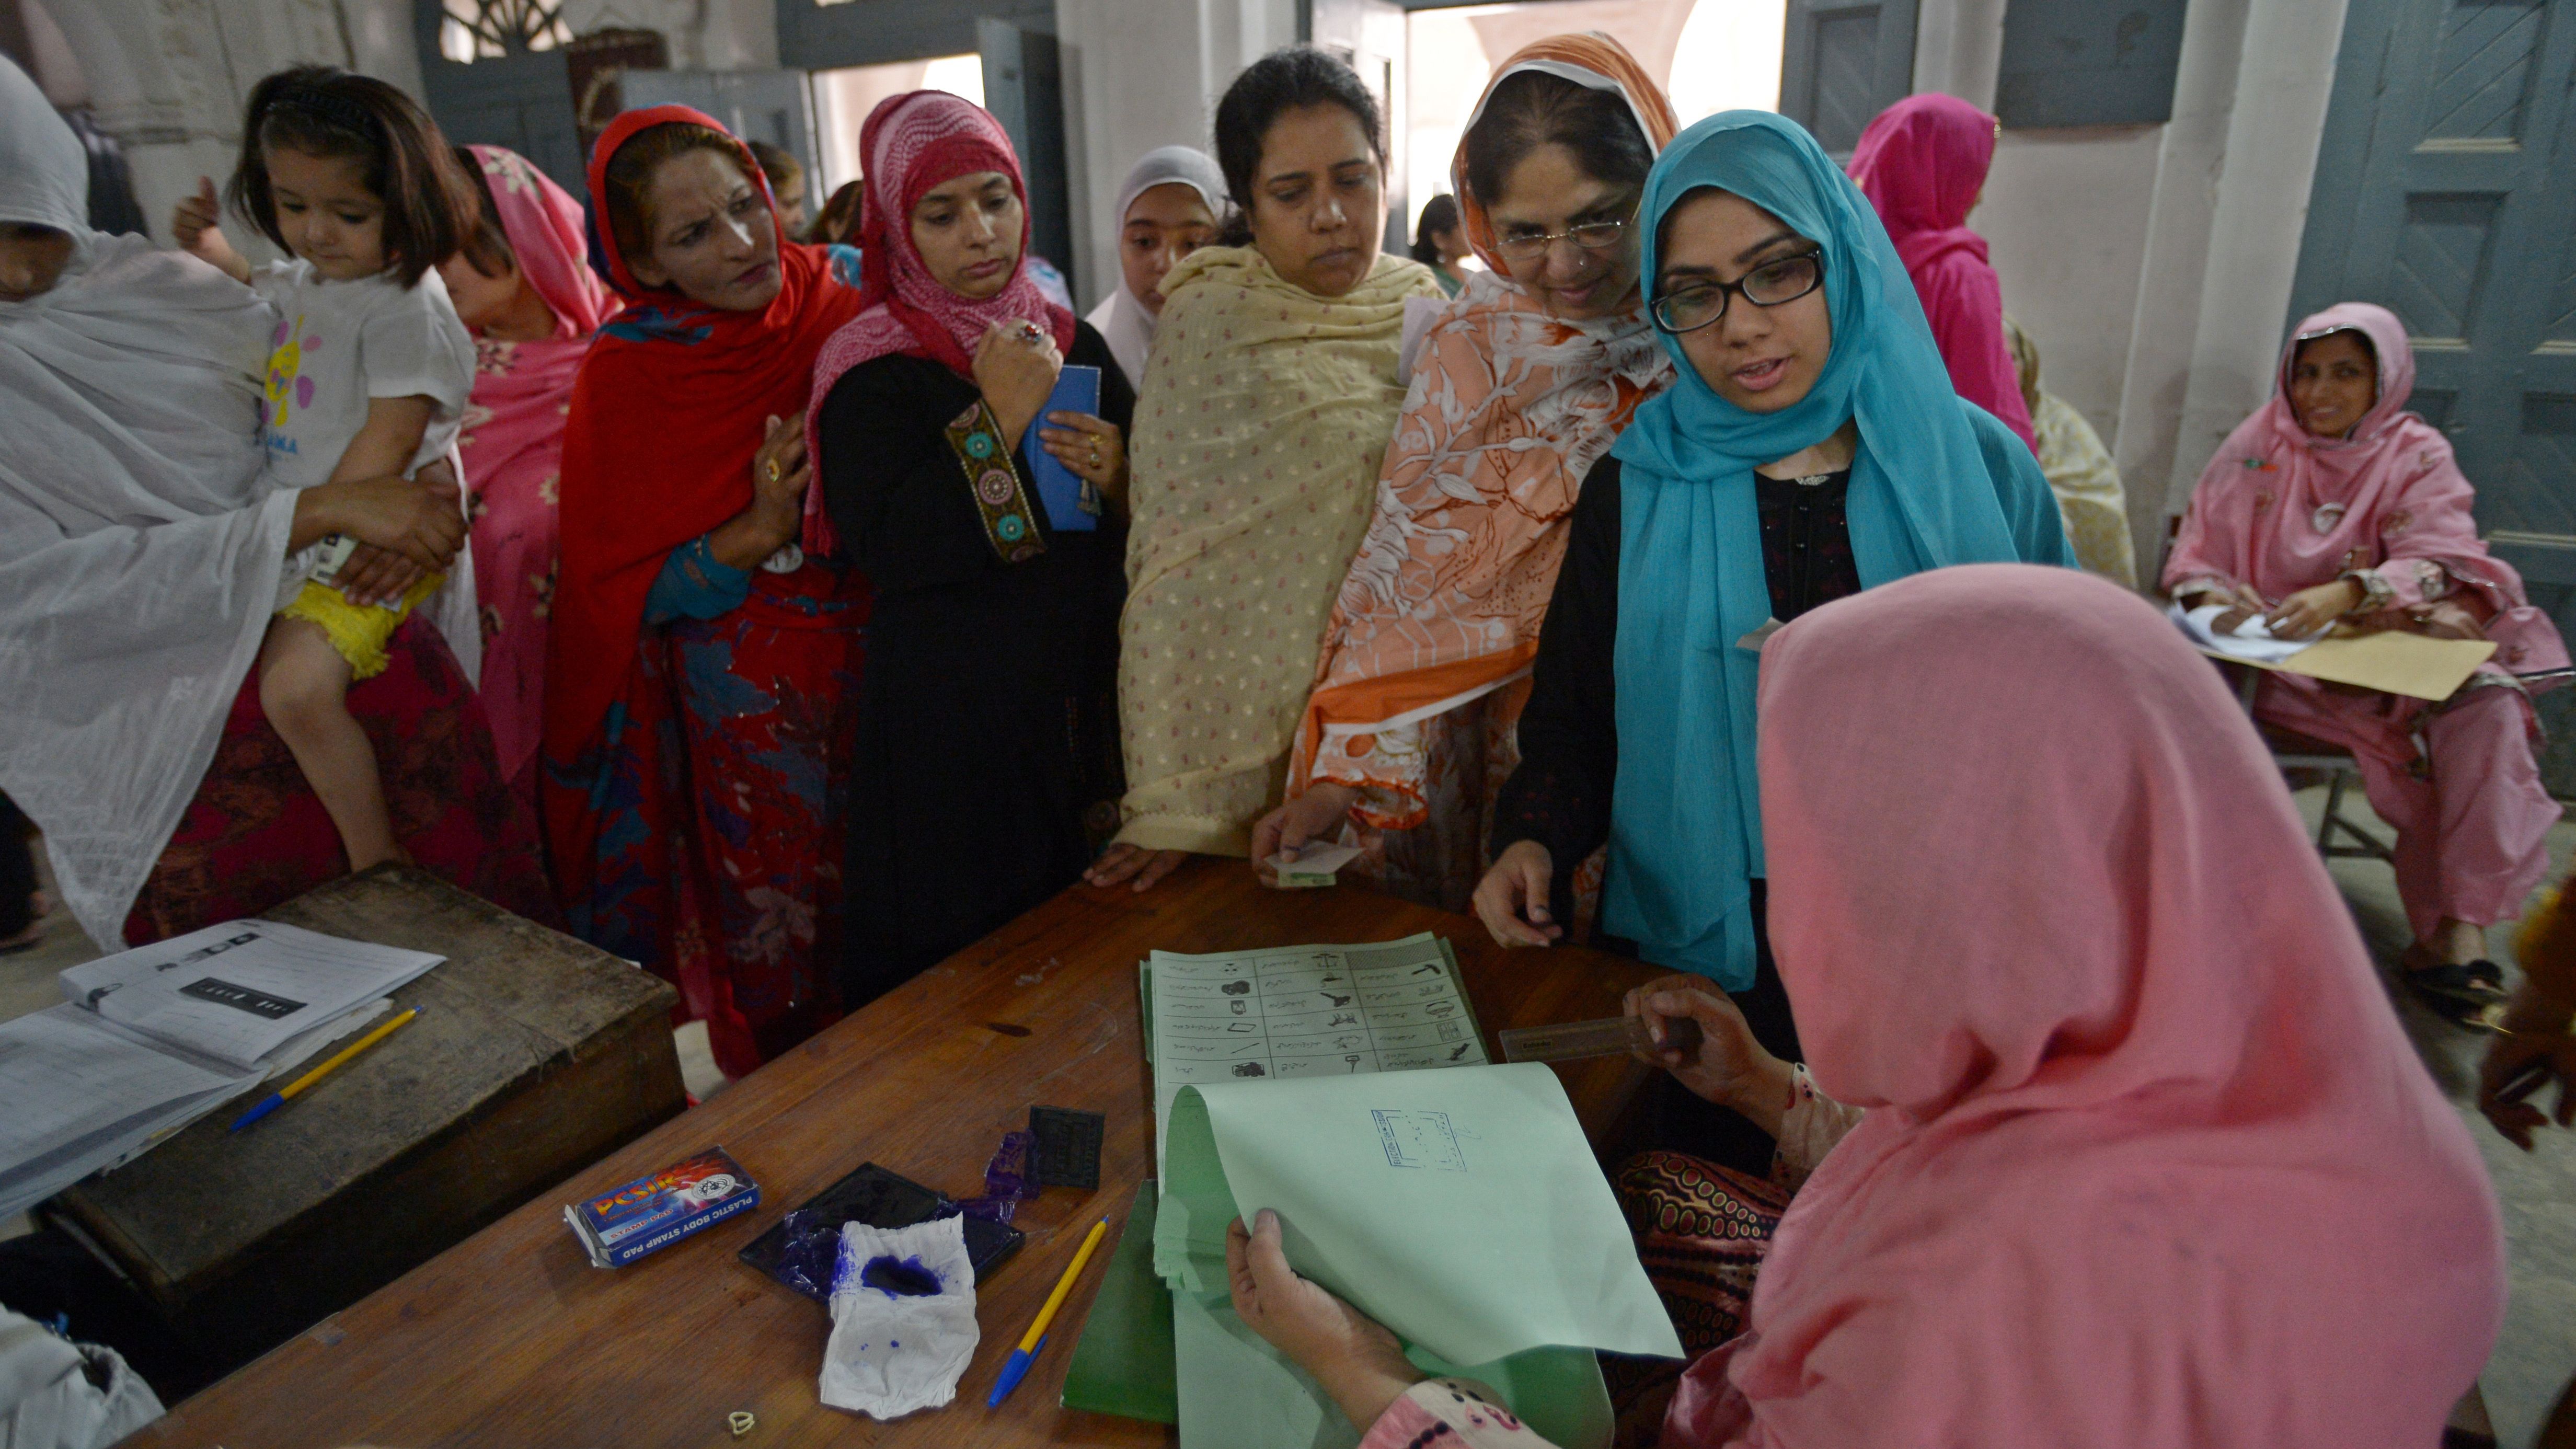 Pakistani women can vote, but should be lightly beaten if they defy their husbands' commands, an Islamic council recommends. 